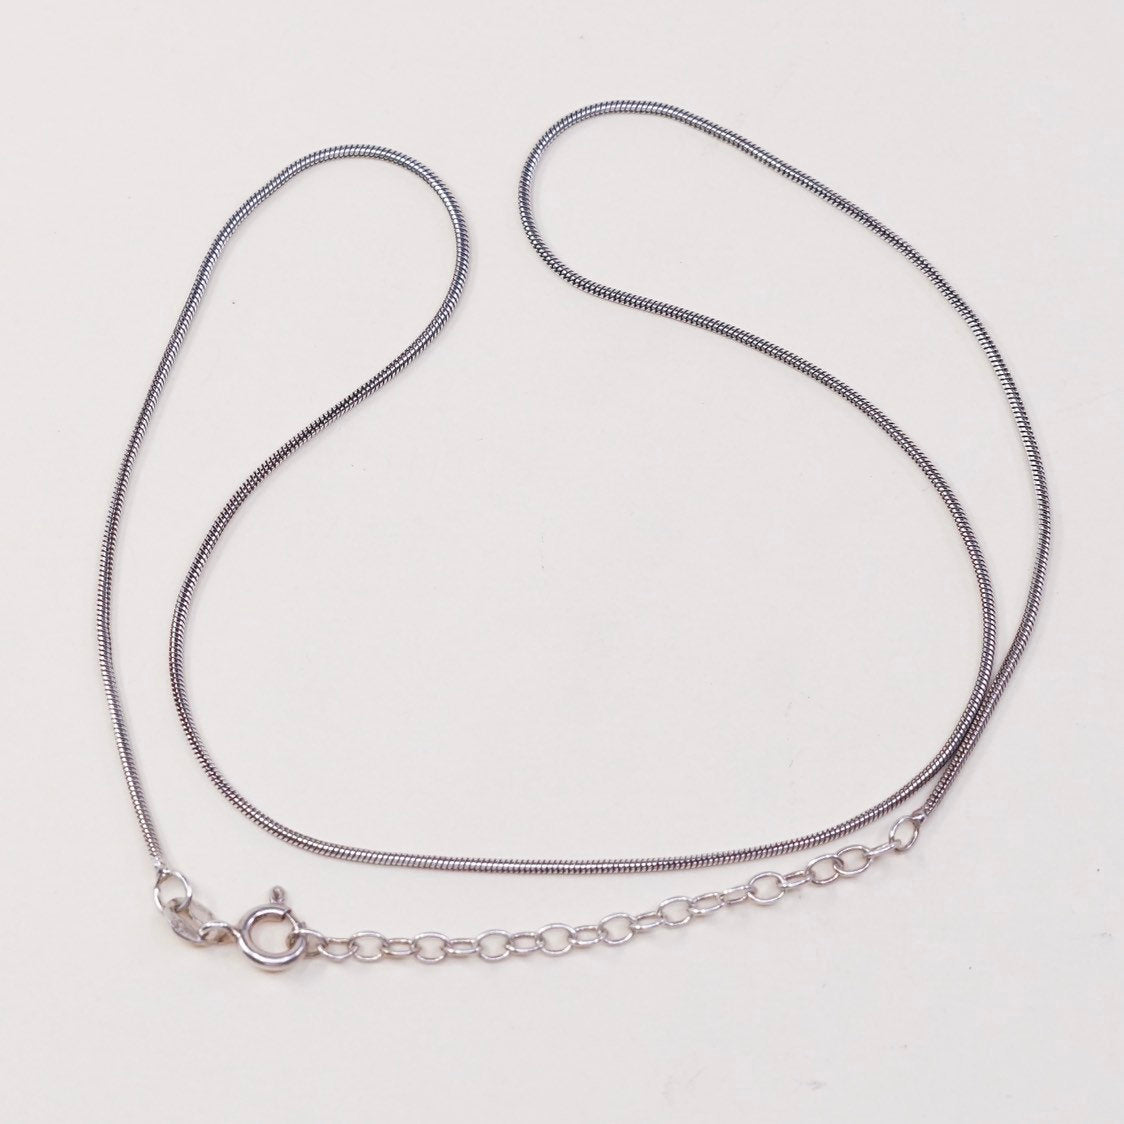 16"+2, vtg sterling silver snake chain, Italy made silver necklace